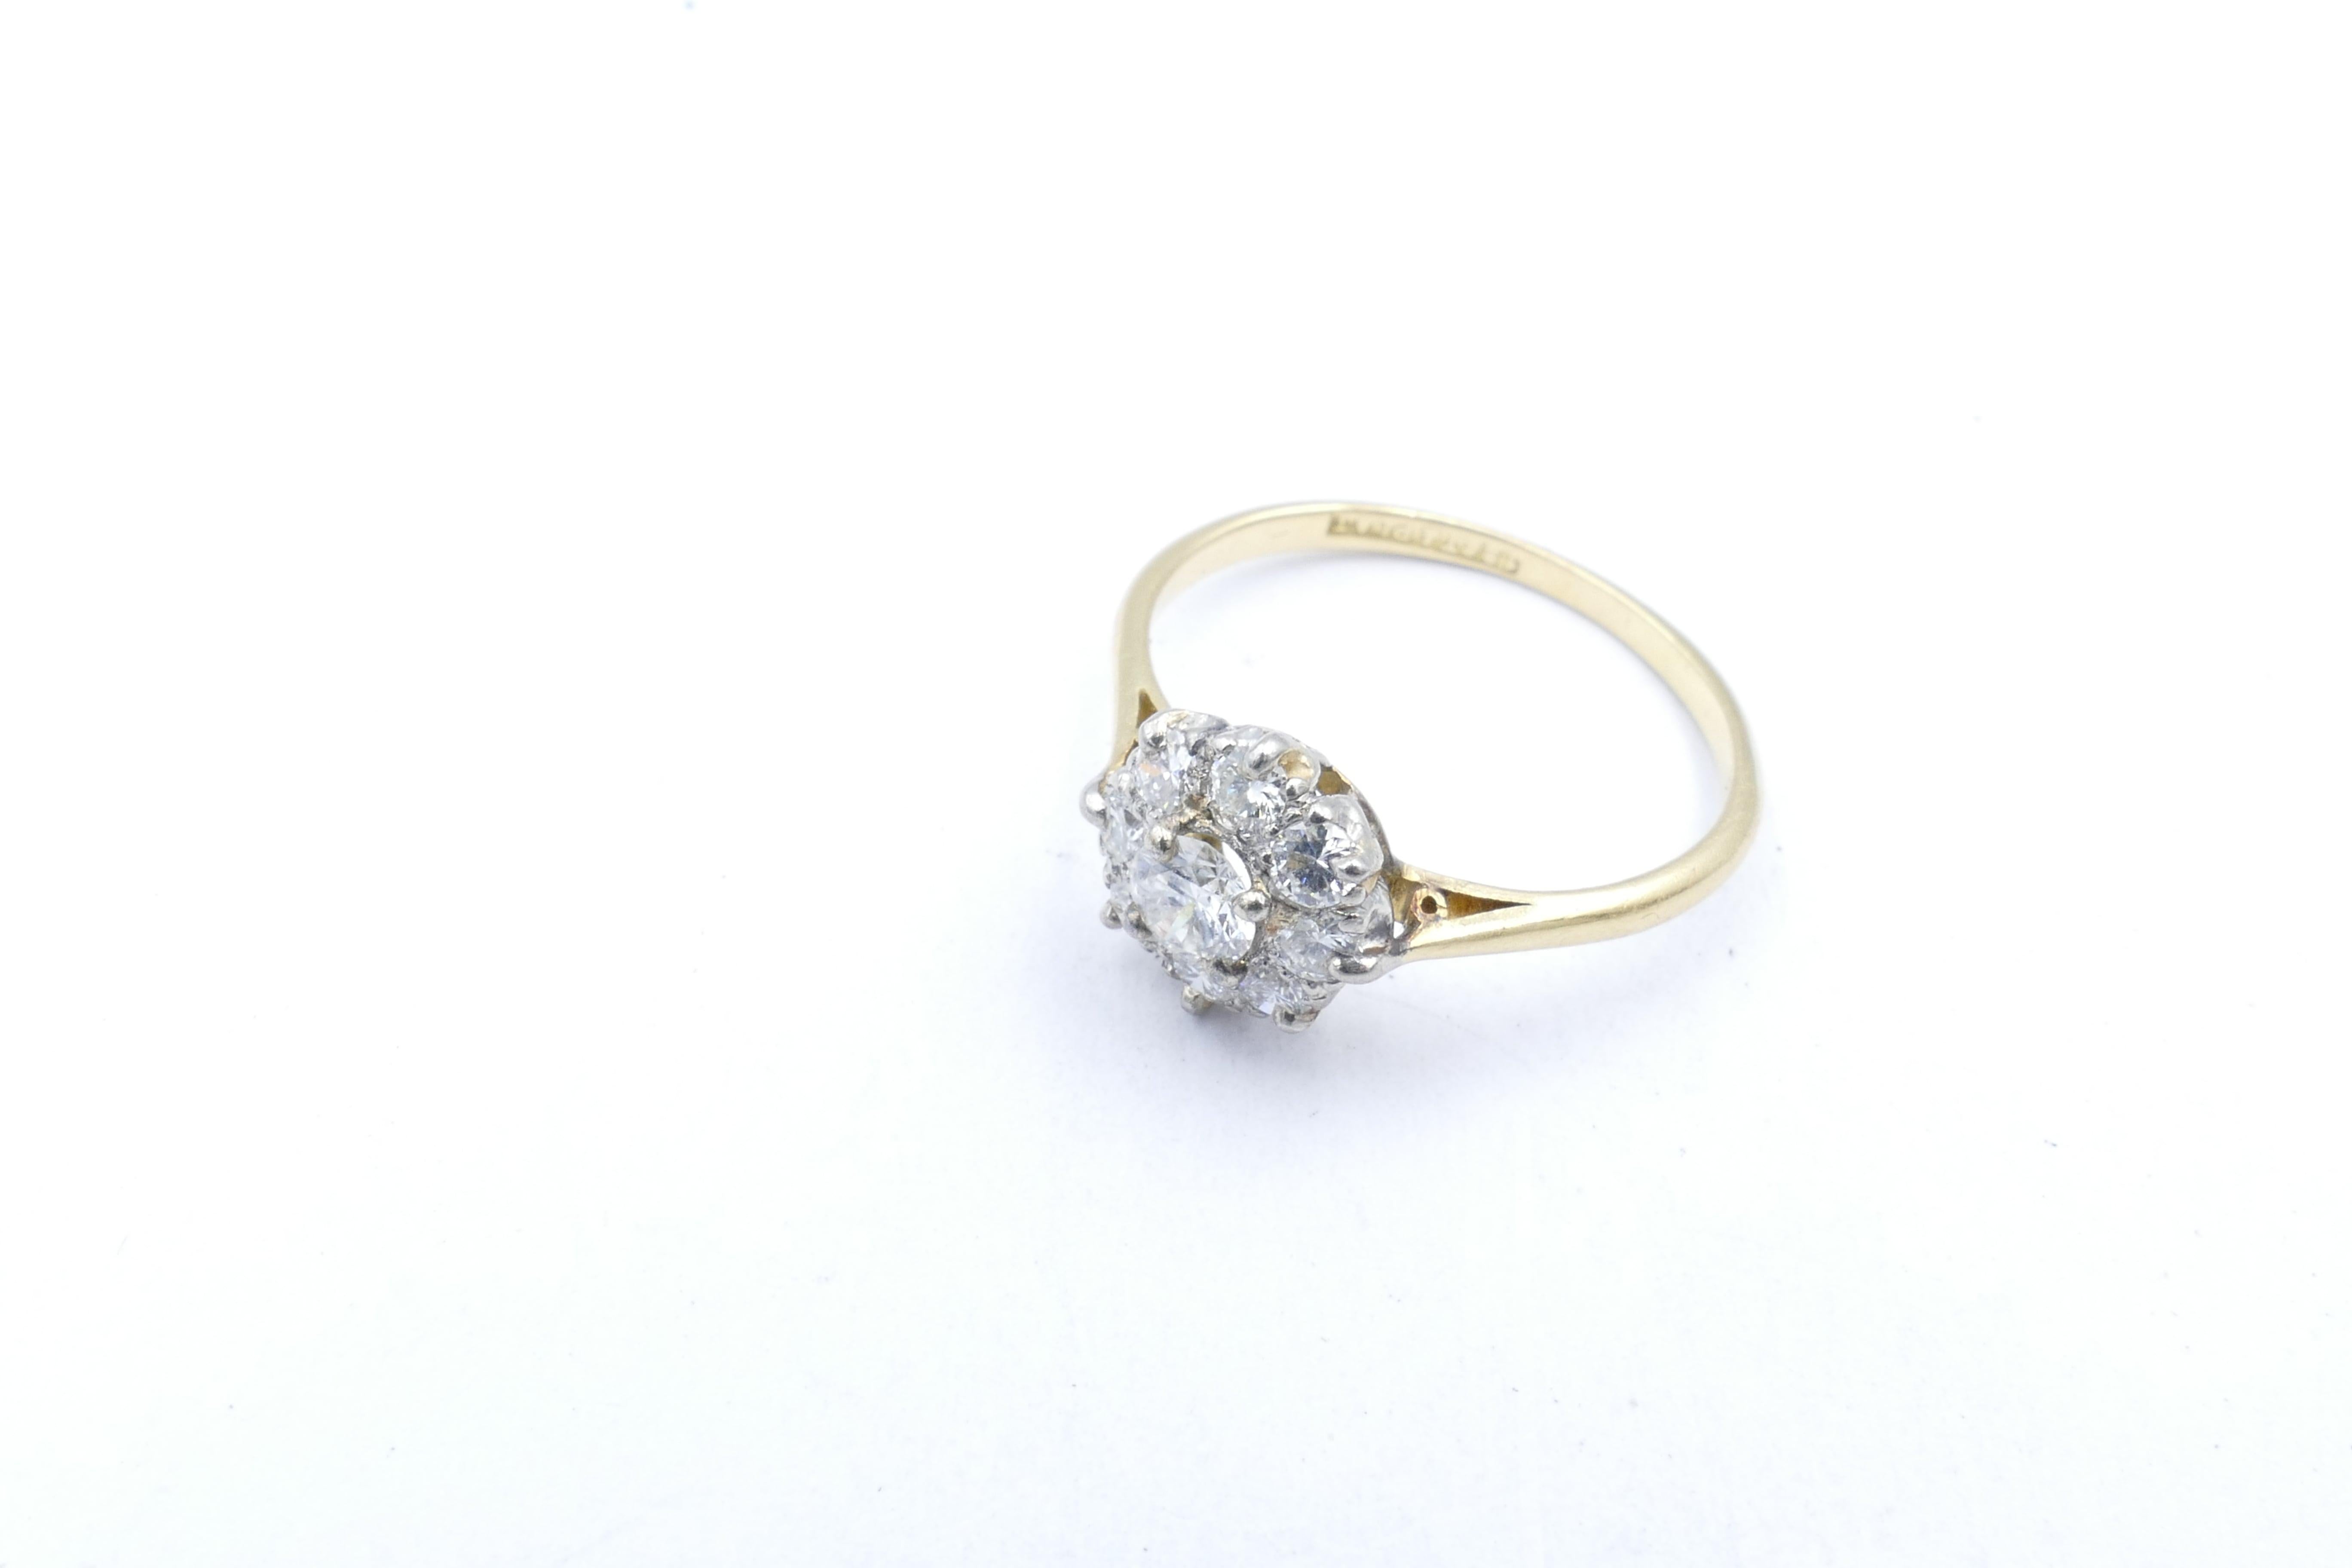 This beautiful Diamond Daisy Ring was sold to me from a very highly regarded Auction House overseas, as genuine Antique and I think this could well be the case.
However the valuer has designated it as Vintage so I am giving both opinions